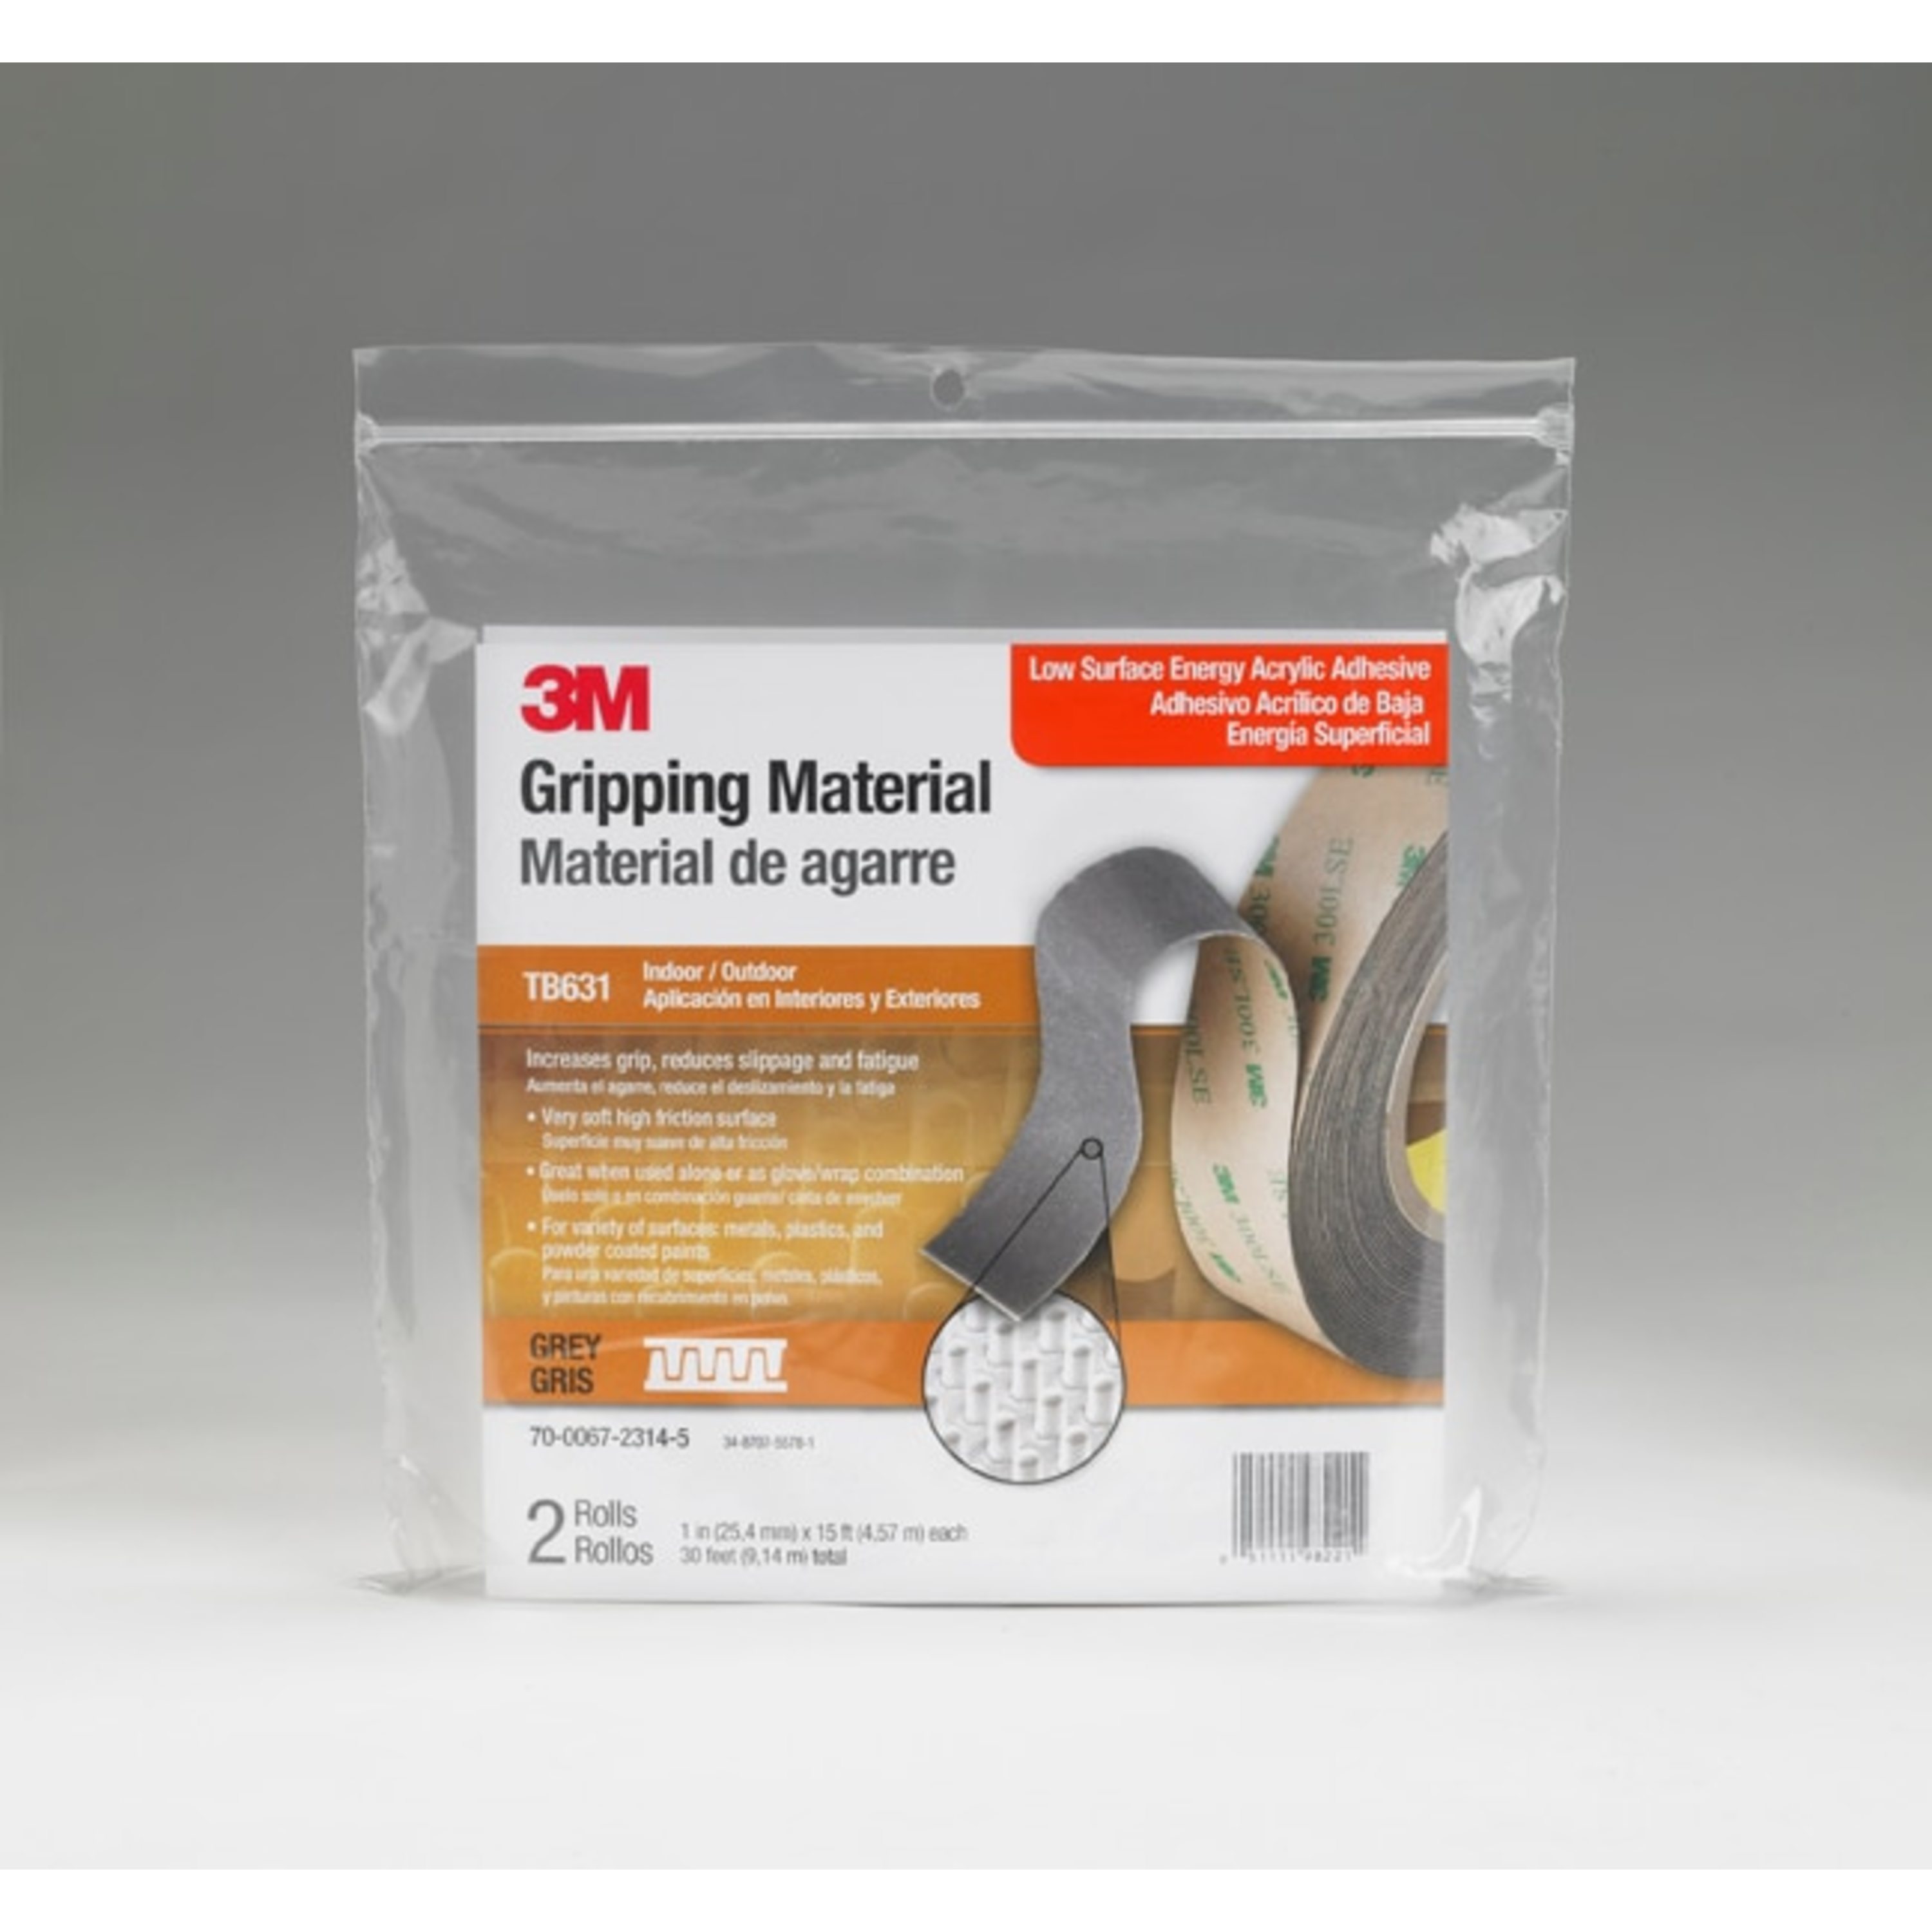 3M™ Gripping Material TB631, Gray, 1 in x 15 ft, 2 rolls per bag